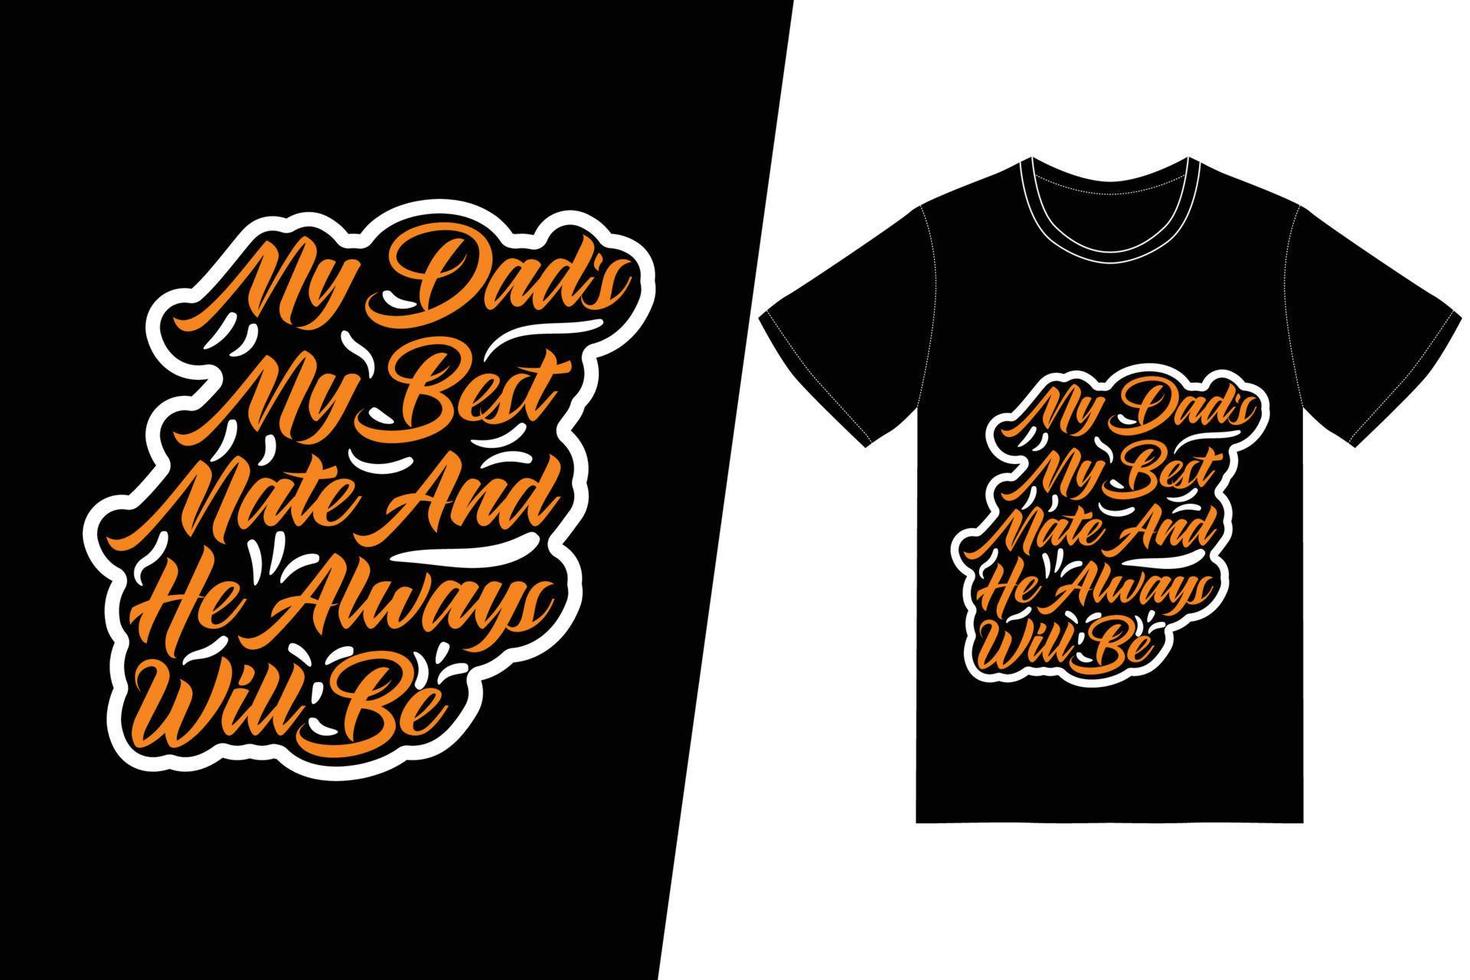 My dad's my best mate, and he always will be t-shirt design. Fathers Day t-shirt design vector. For t-shirt print and other uses. vector